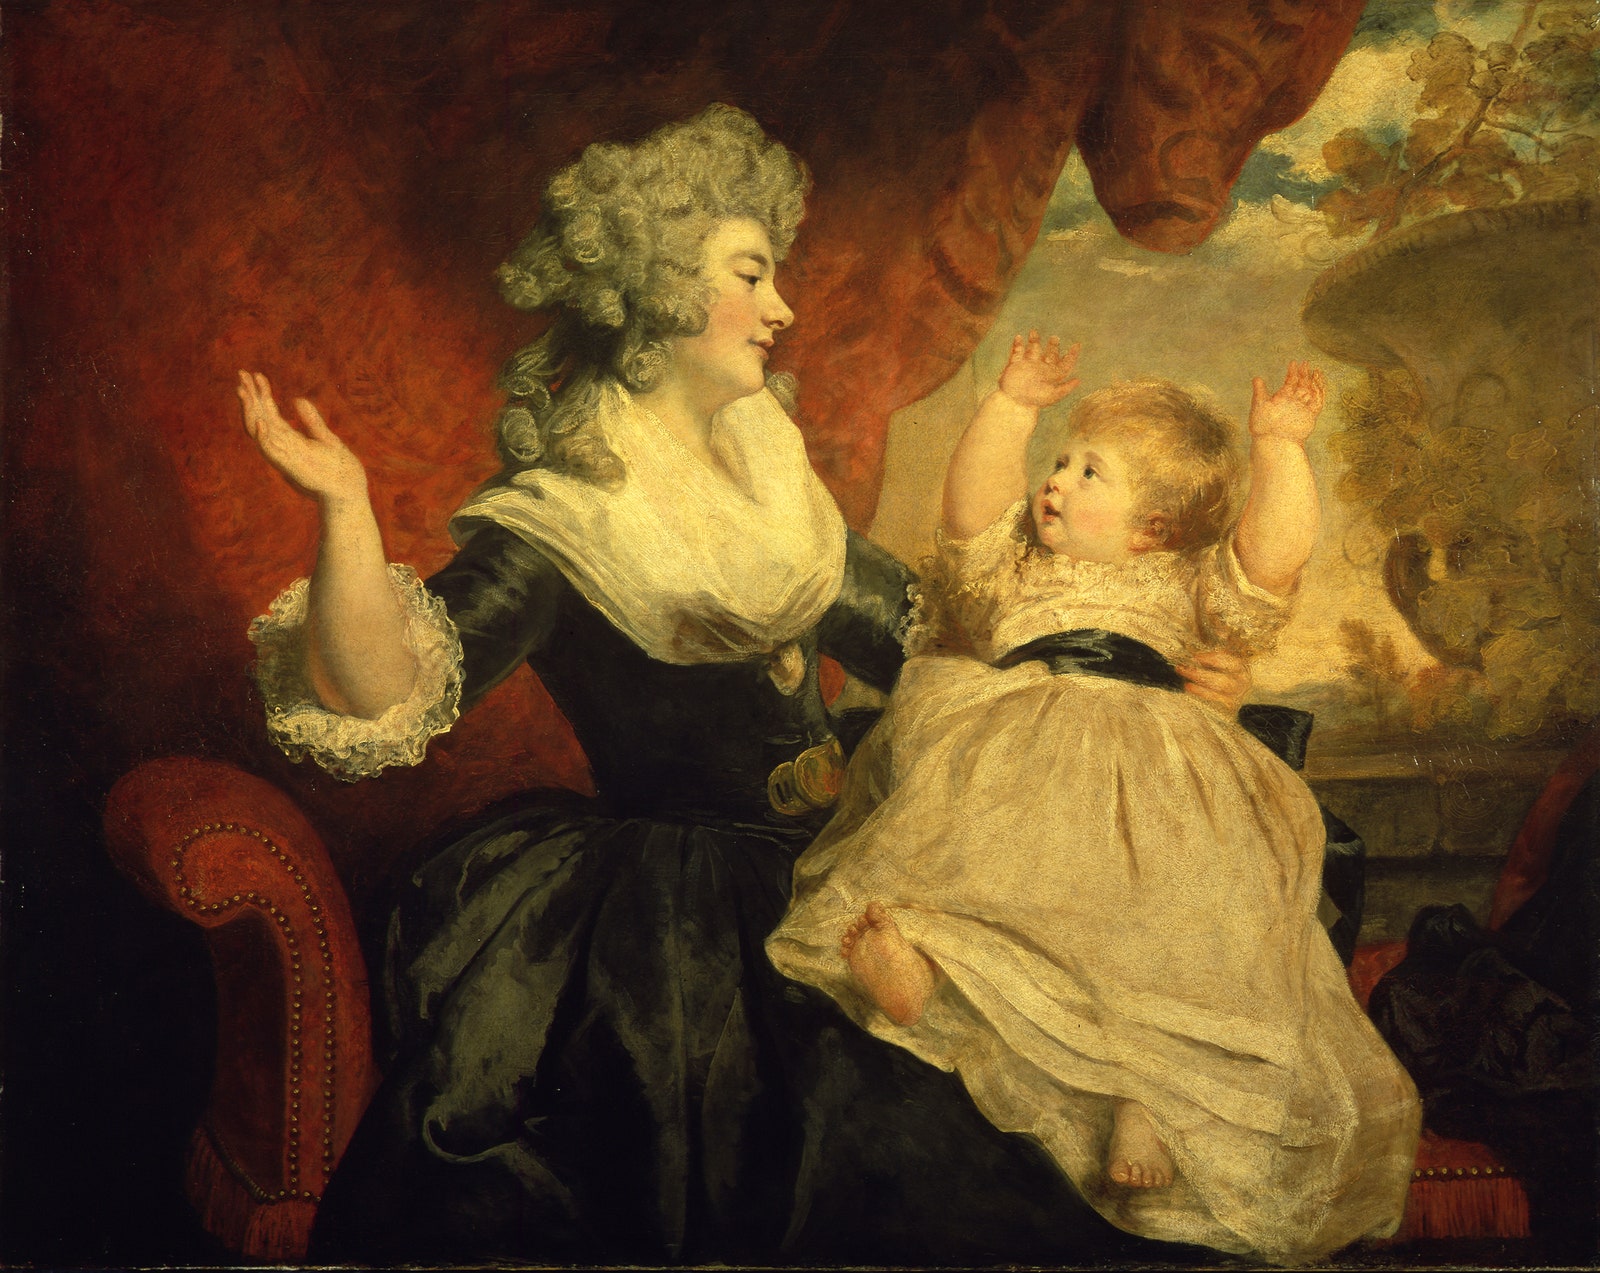 Portrait of Georgiana Spencer Duchess of Devonshire with her daughter Lady Georgiana Cavendish later Countess of Carlisle.